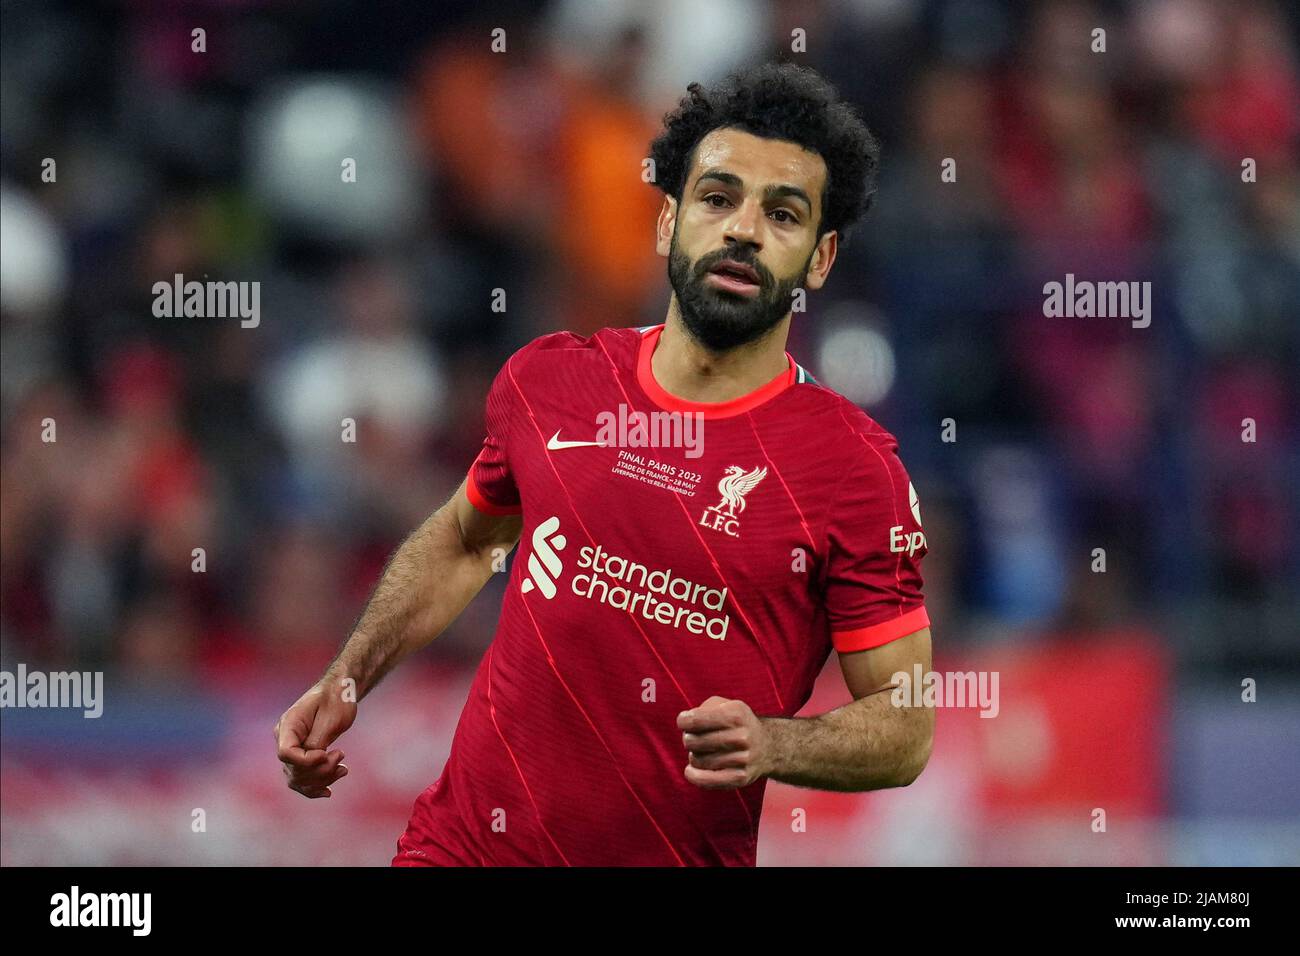 Mohamed Salah of Liverpool FC during the UEFA Champions League Final match between Liverpool FC and Real Madrid played at Stade de France on May 28, 2022 in Paris, France. (Photo by Magma) Stock Photo